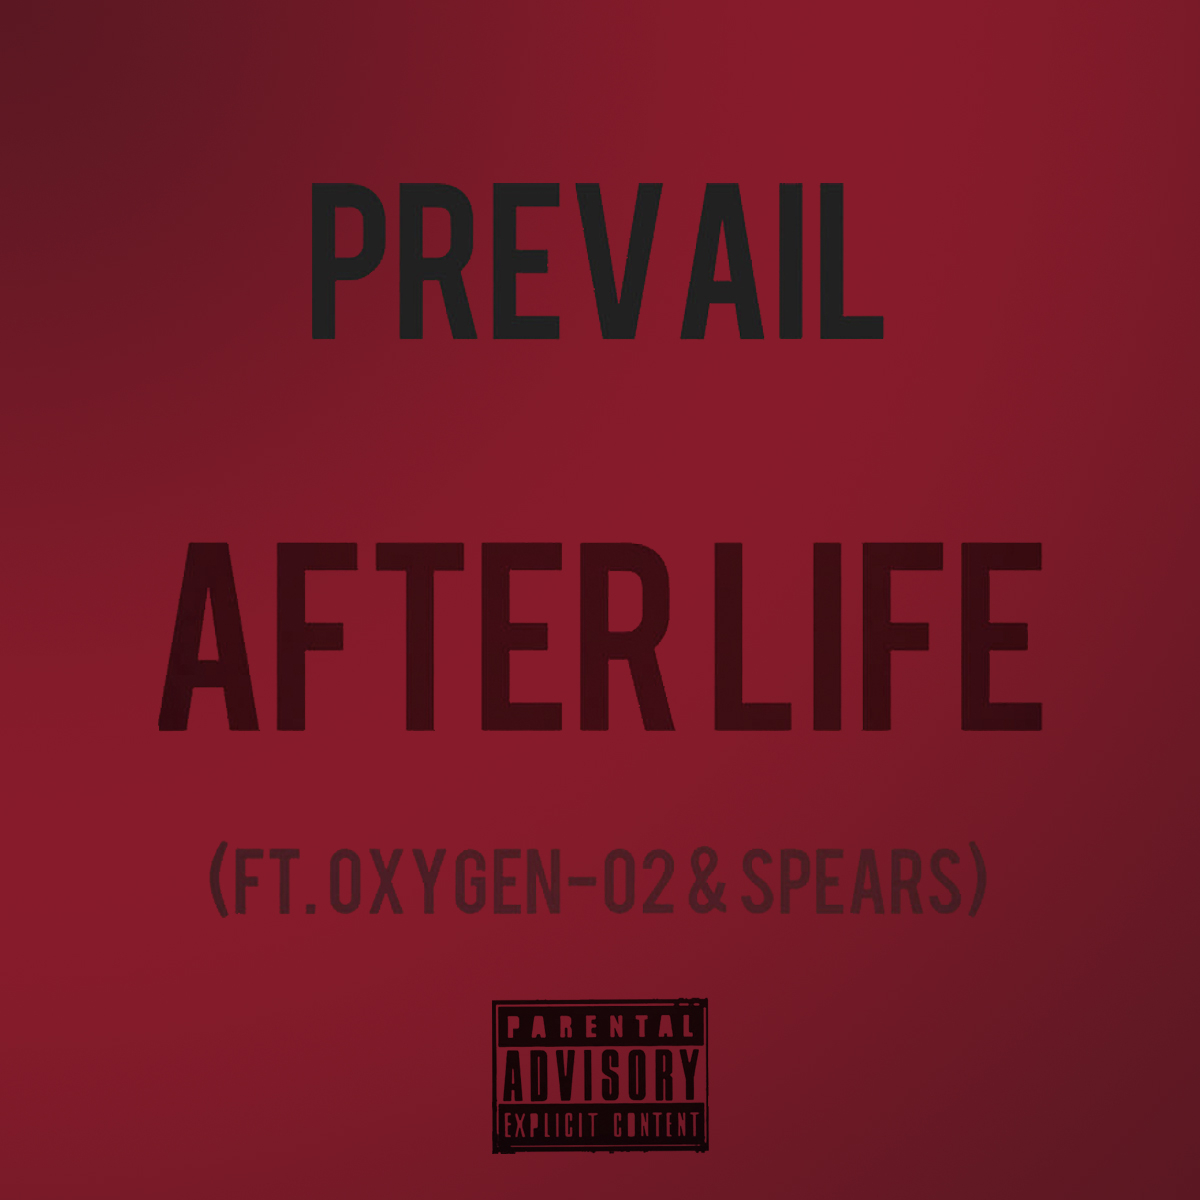 Prevail | 'After Life'